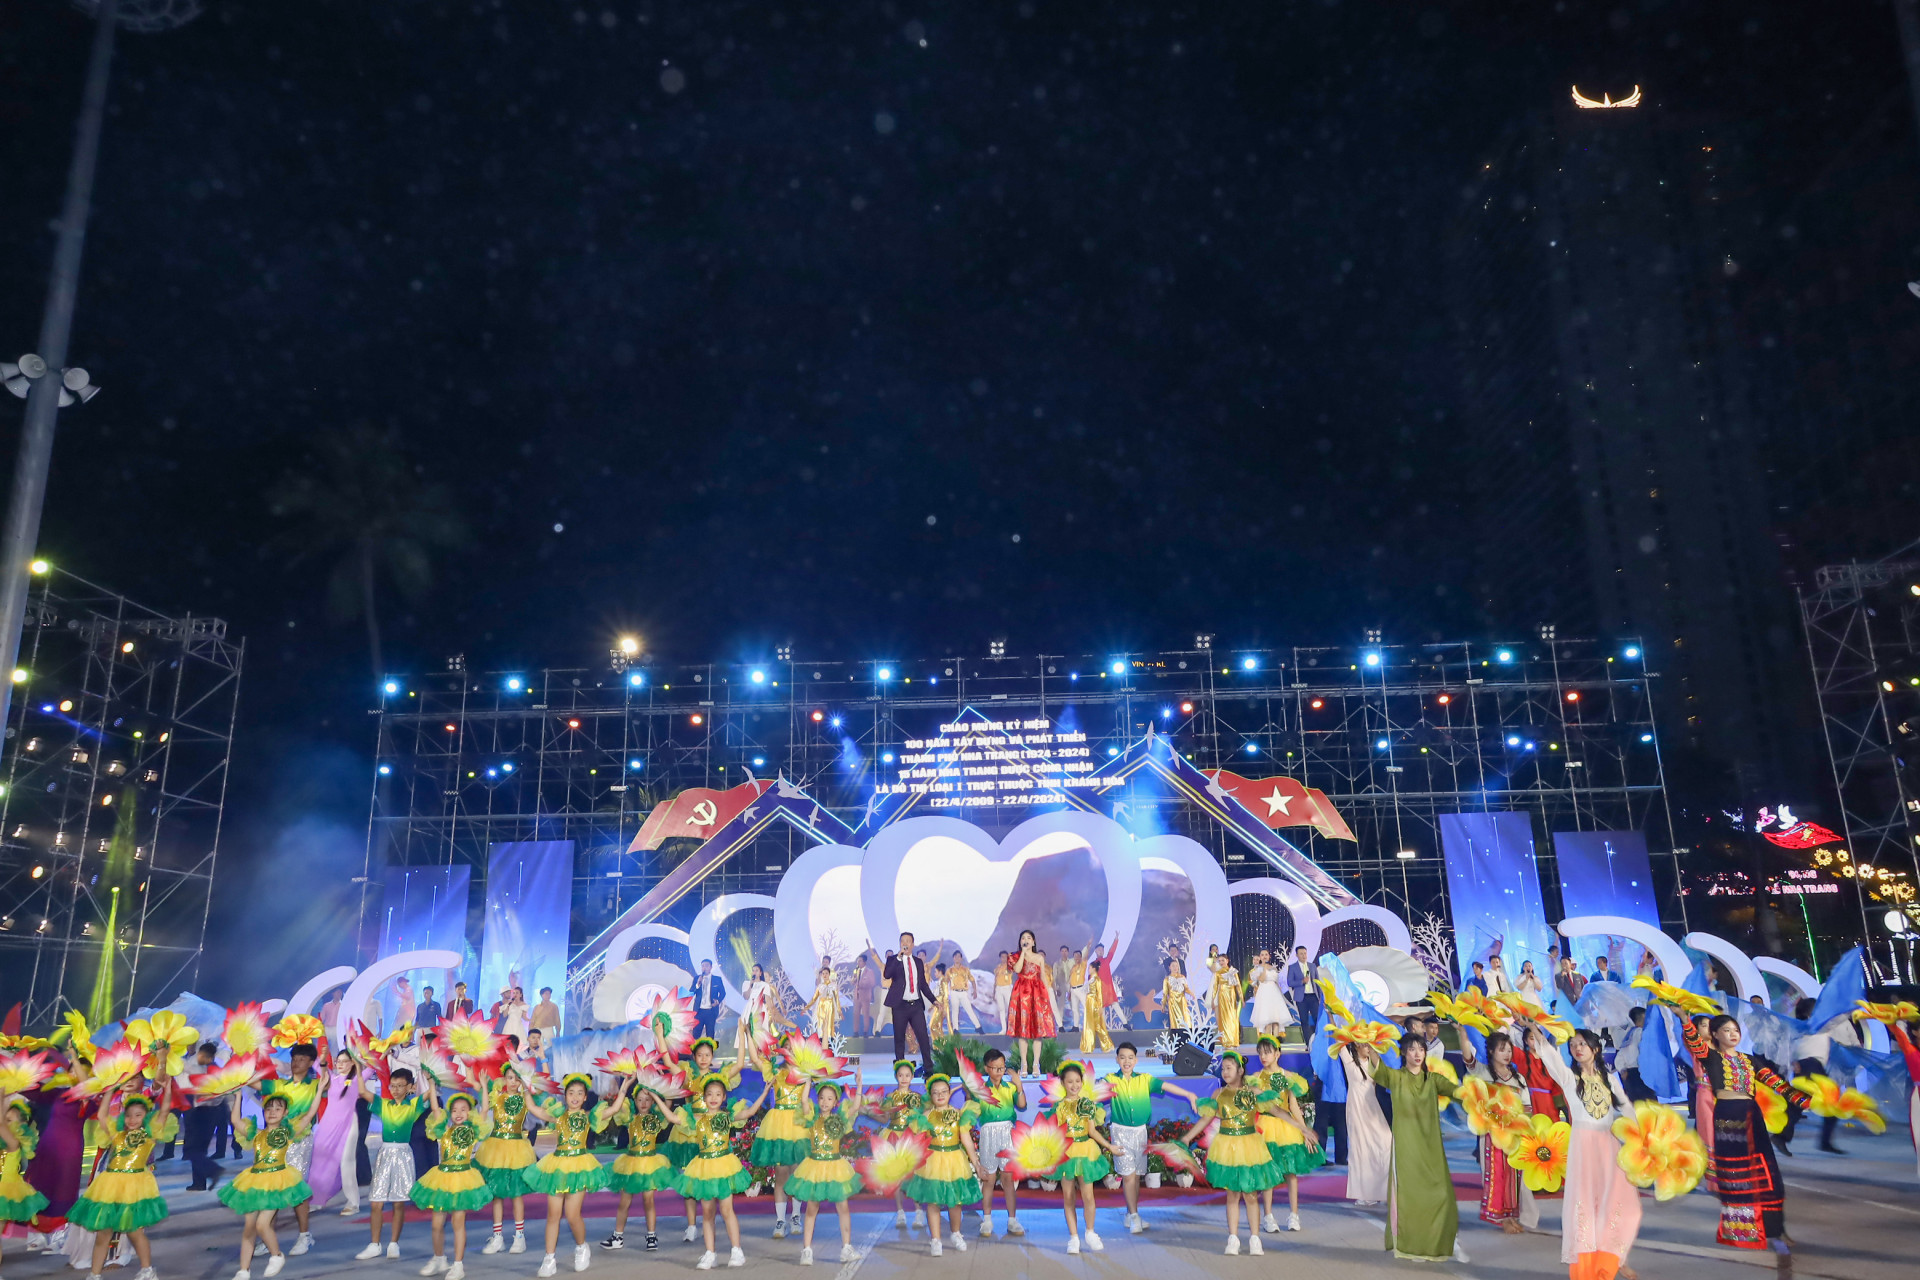 The closing performance of the music show celebrating Nha Trang City’s 100th anniversary of construction and development

